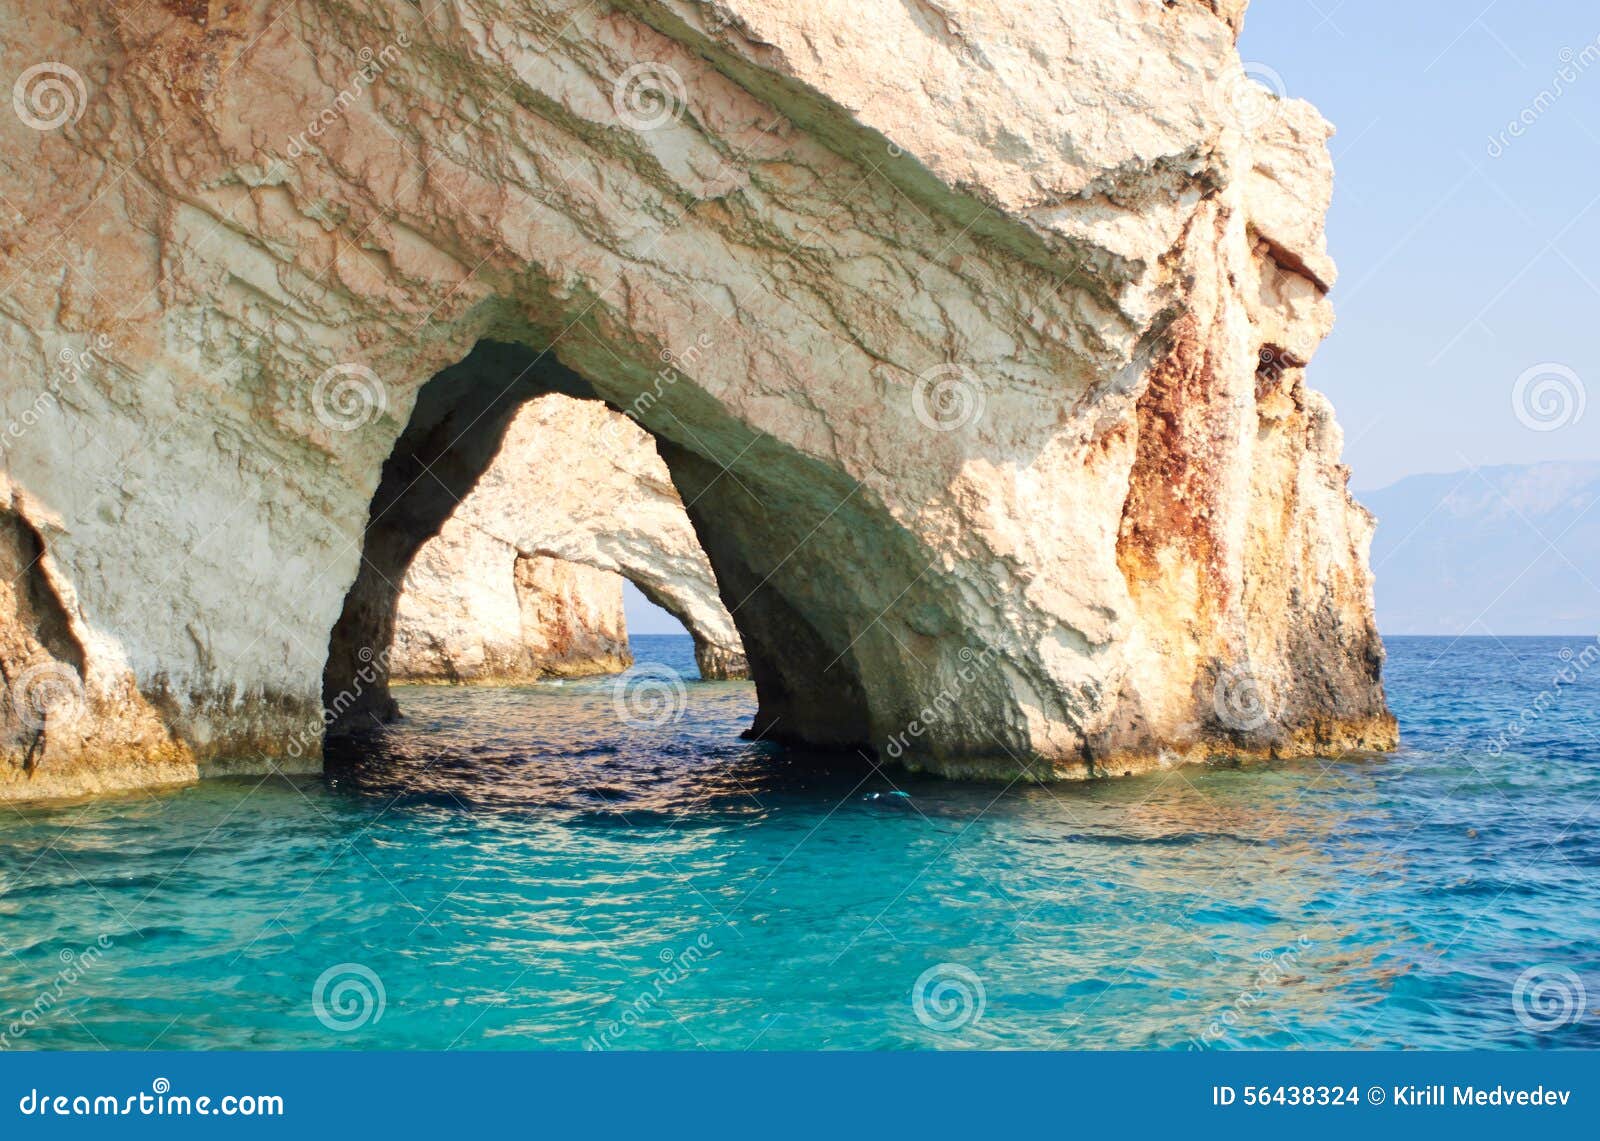 blue caves at bright sunny day zakinthos greece